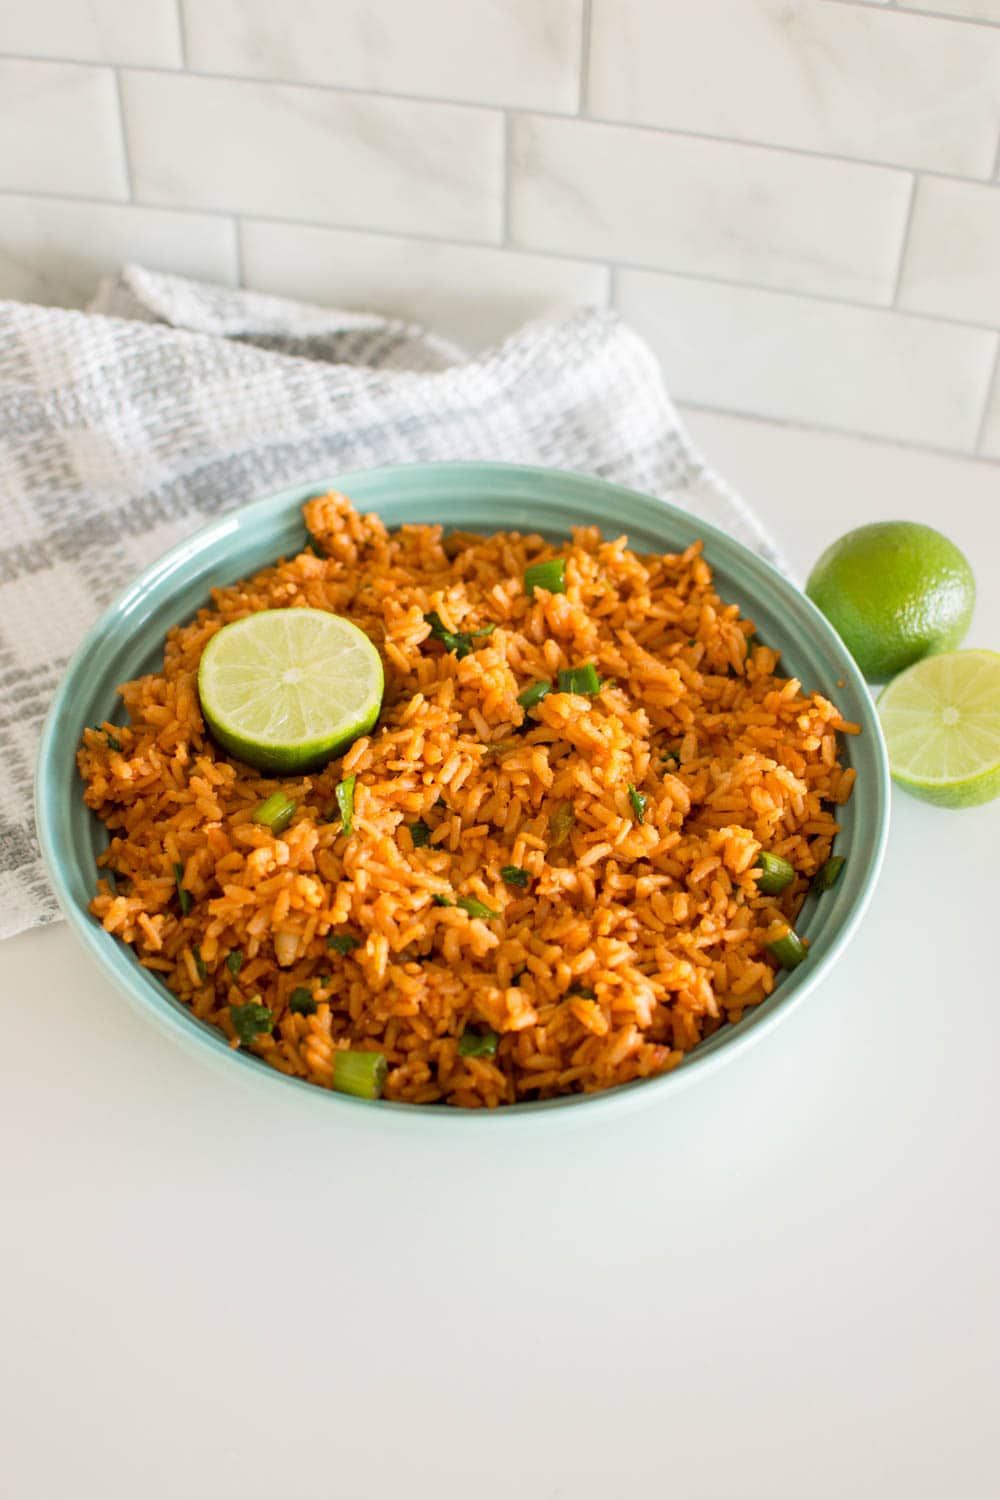 Our recipe for Easy Mexican Rice in a mint green bowl, served with a slice of fresh lime